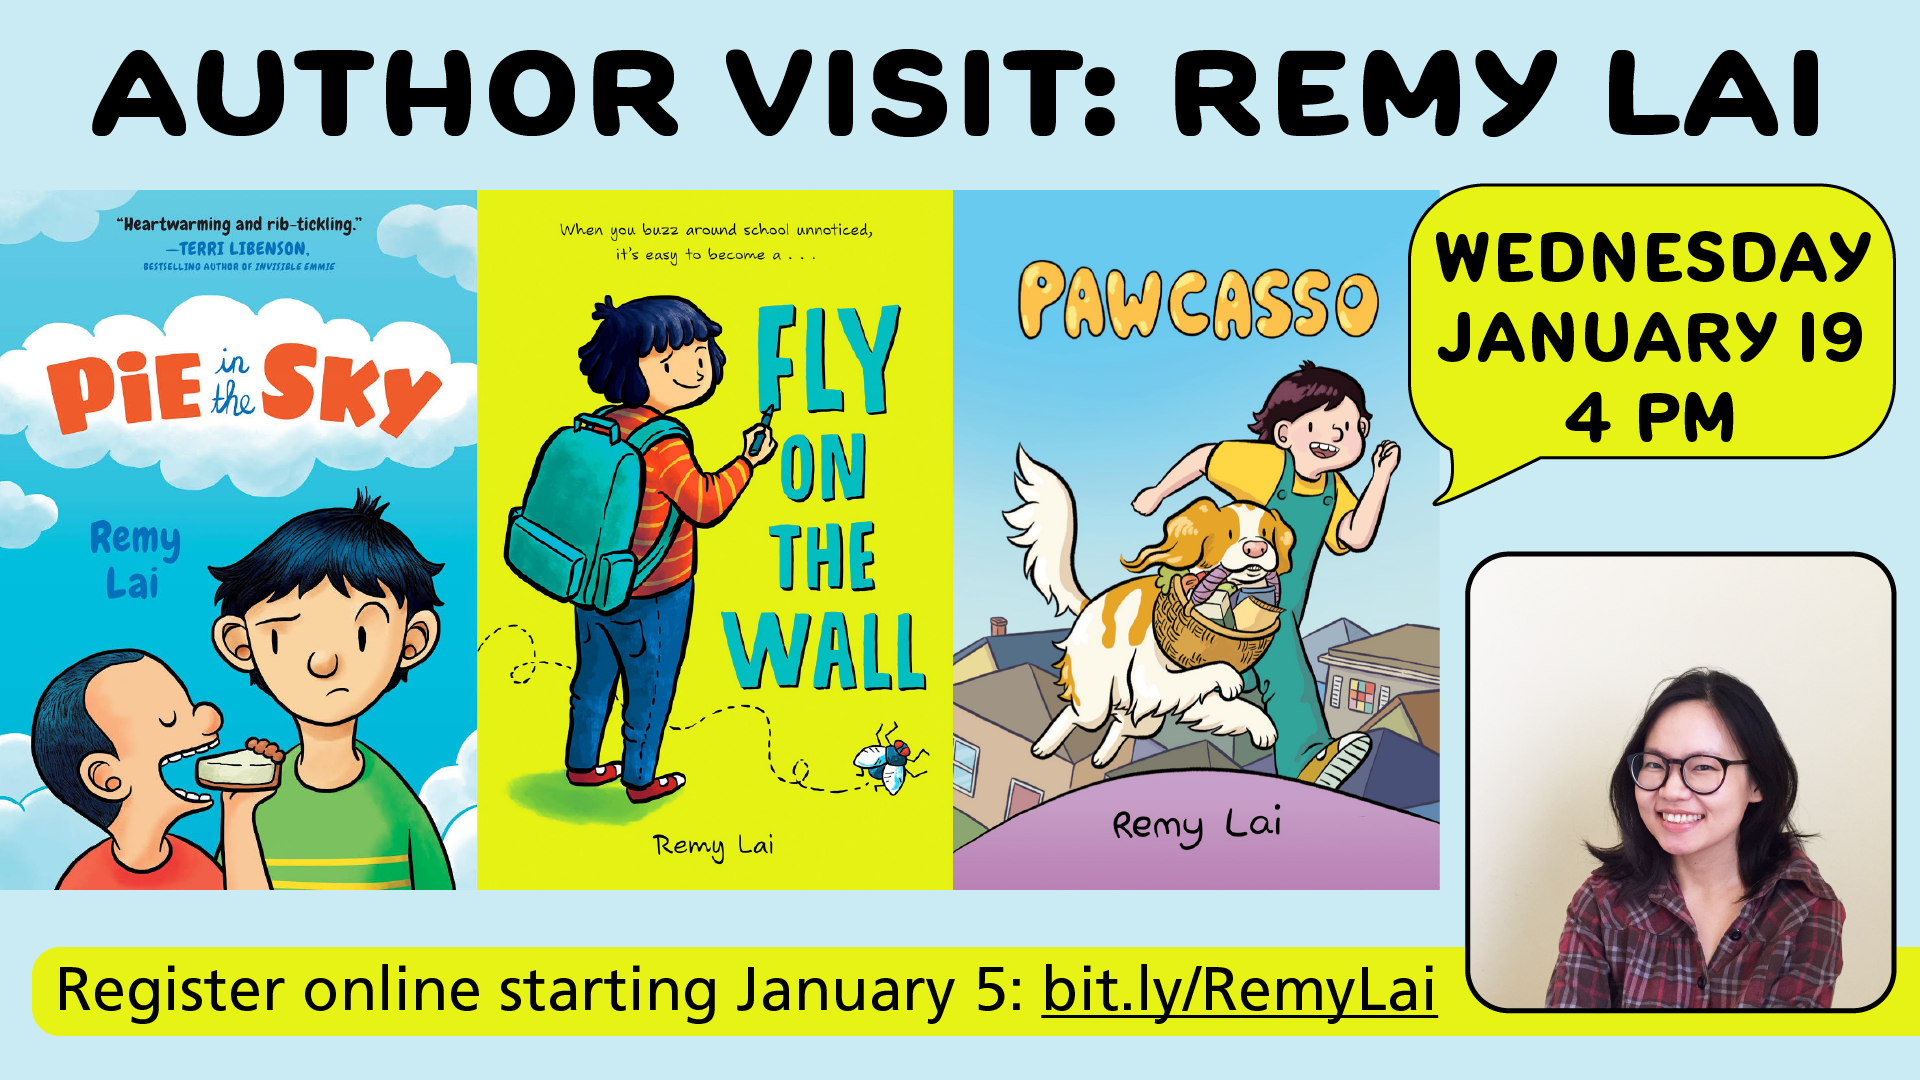 Author Visit with Remy Lai, Wednesday, January 19, 4 PM. Register online starting January 5